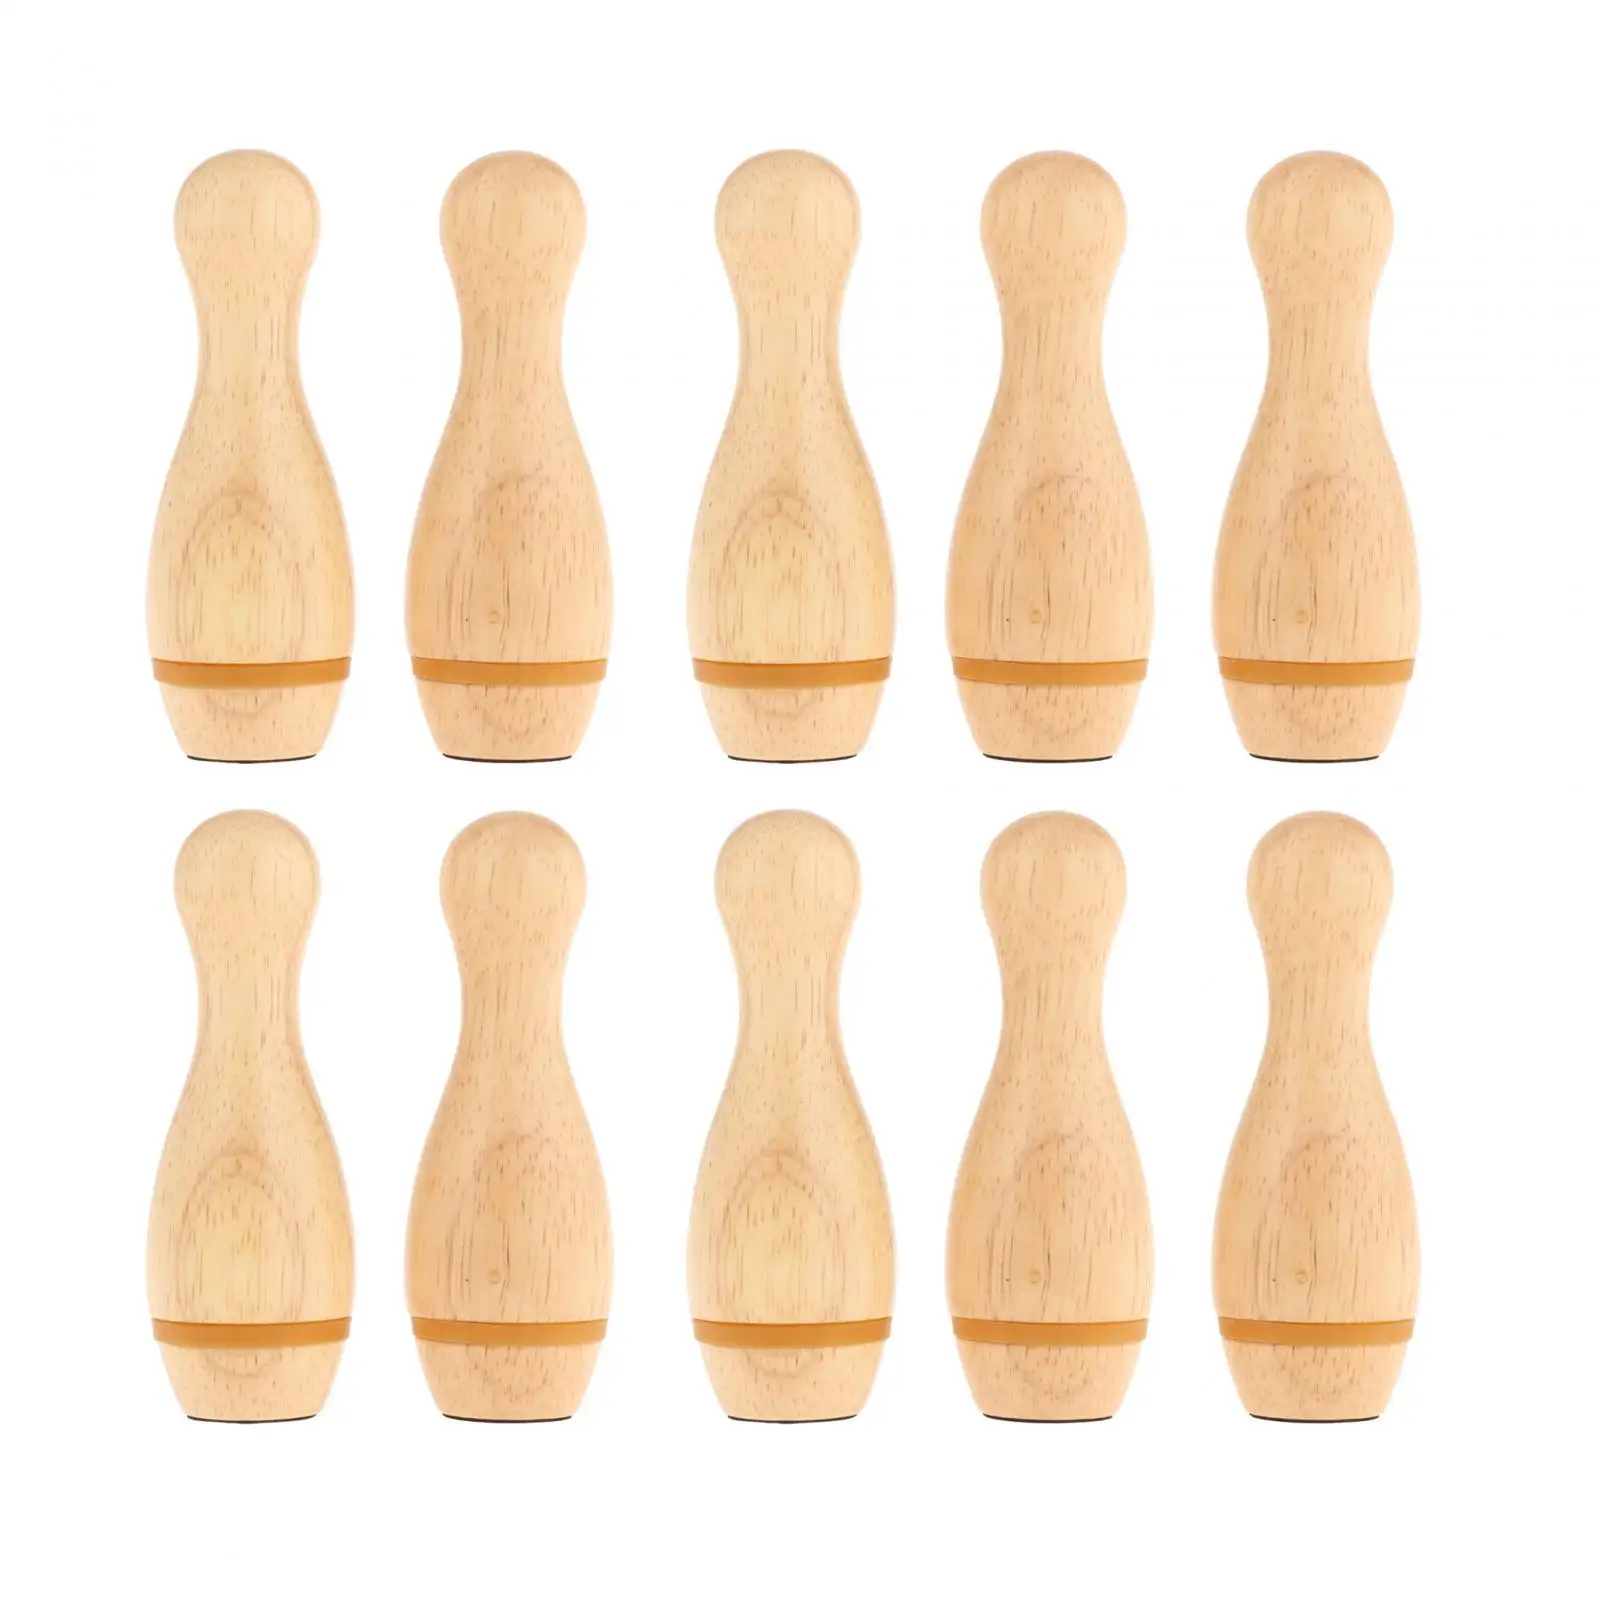 10Pcs Shuffleboard Bowling Pin Shuffleboard Games Indoor Outdoor Portable for Baby Toddlers Boys Girls Sport Party Games